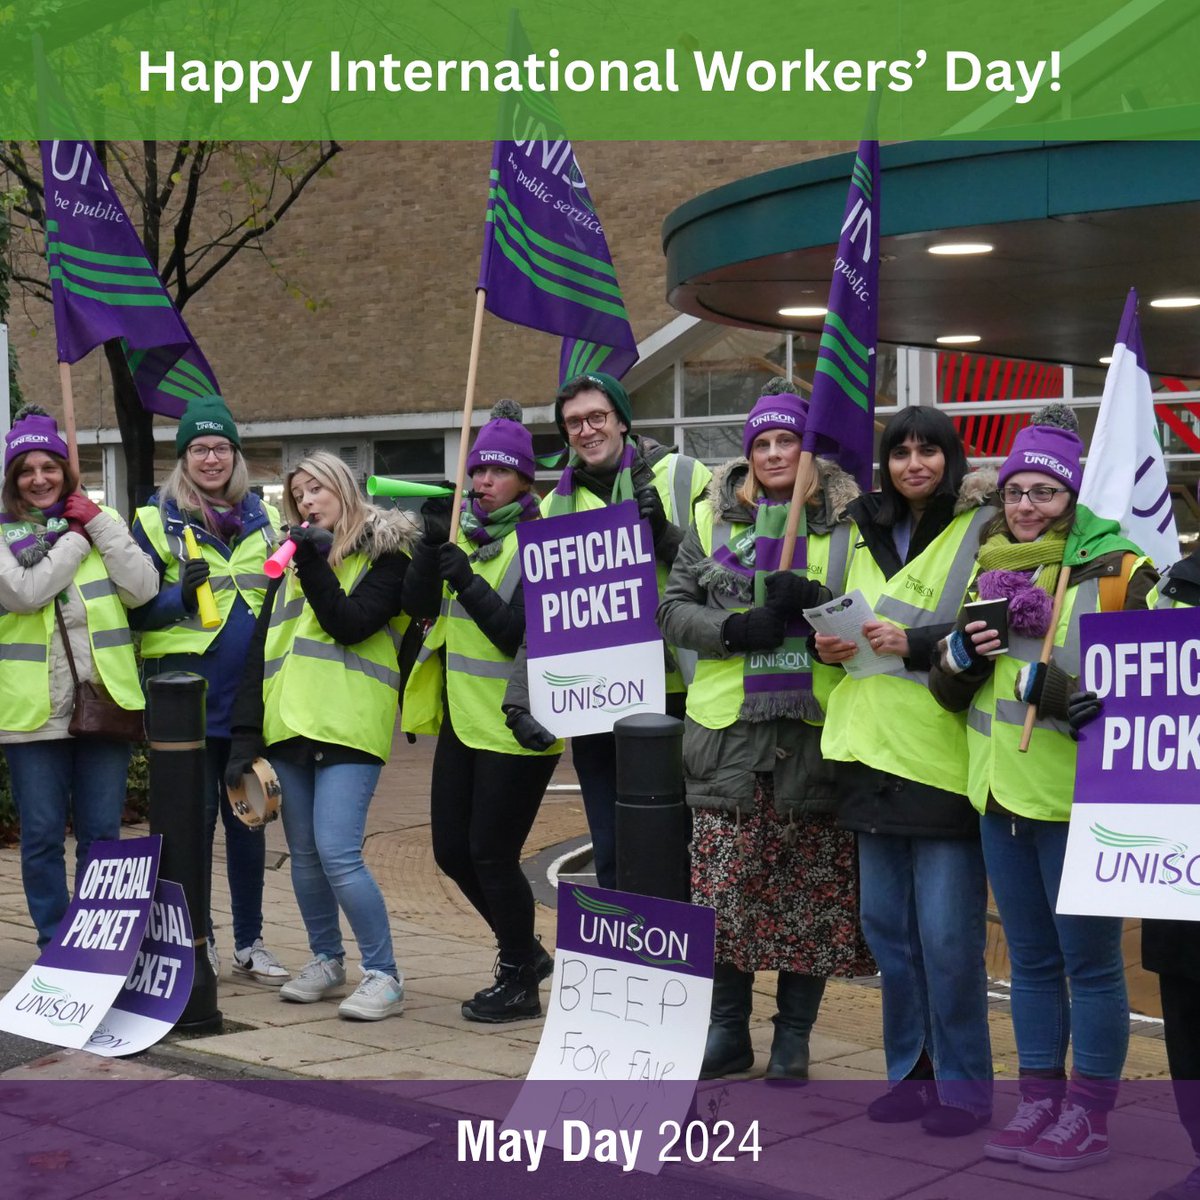 It's May Day: Happy #InternationalWorkersDay to all UNISON members, and workers around the world! ✊ Today we celebrate the invaluable contributions of workers and their unions everywhere. Let's continue to strive for fair wages, safe working conditions, and dignity for all.